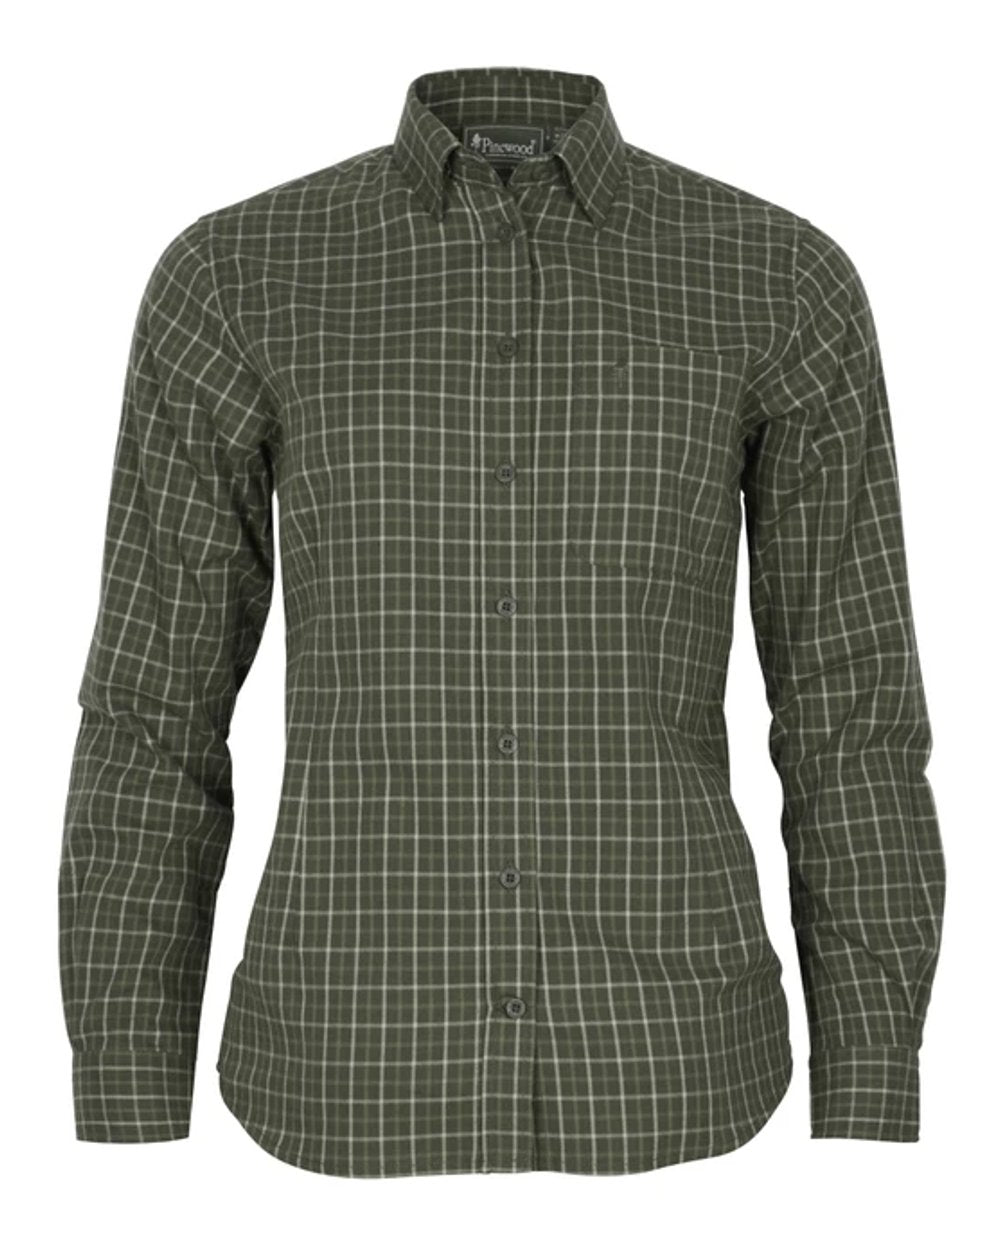 Pinewood Womens Nydala Grouse Shirt in Moss Green